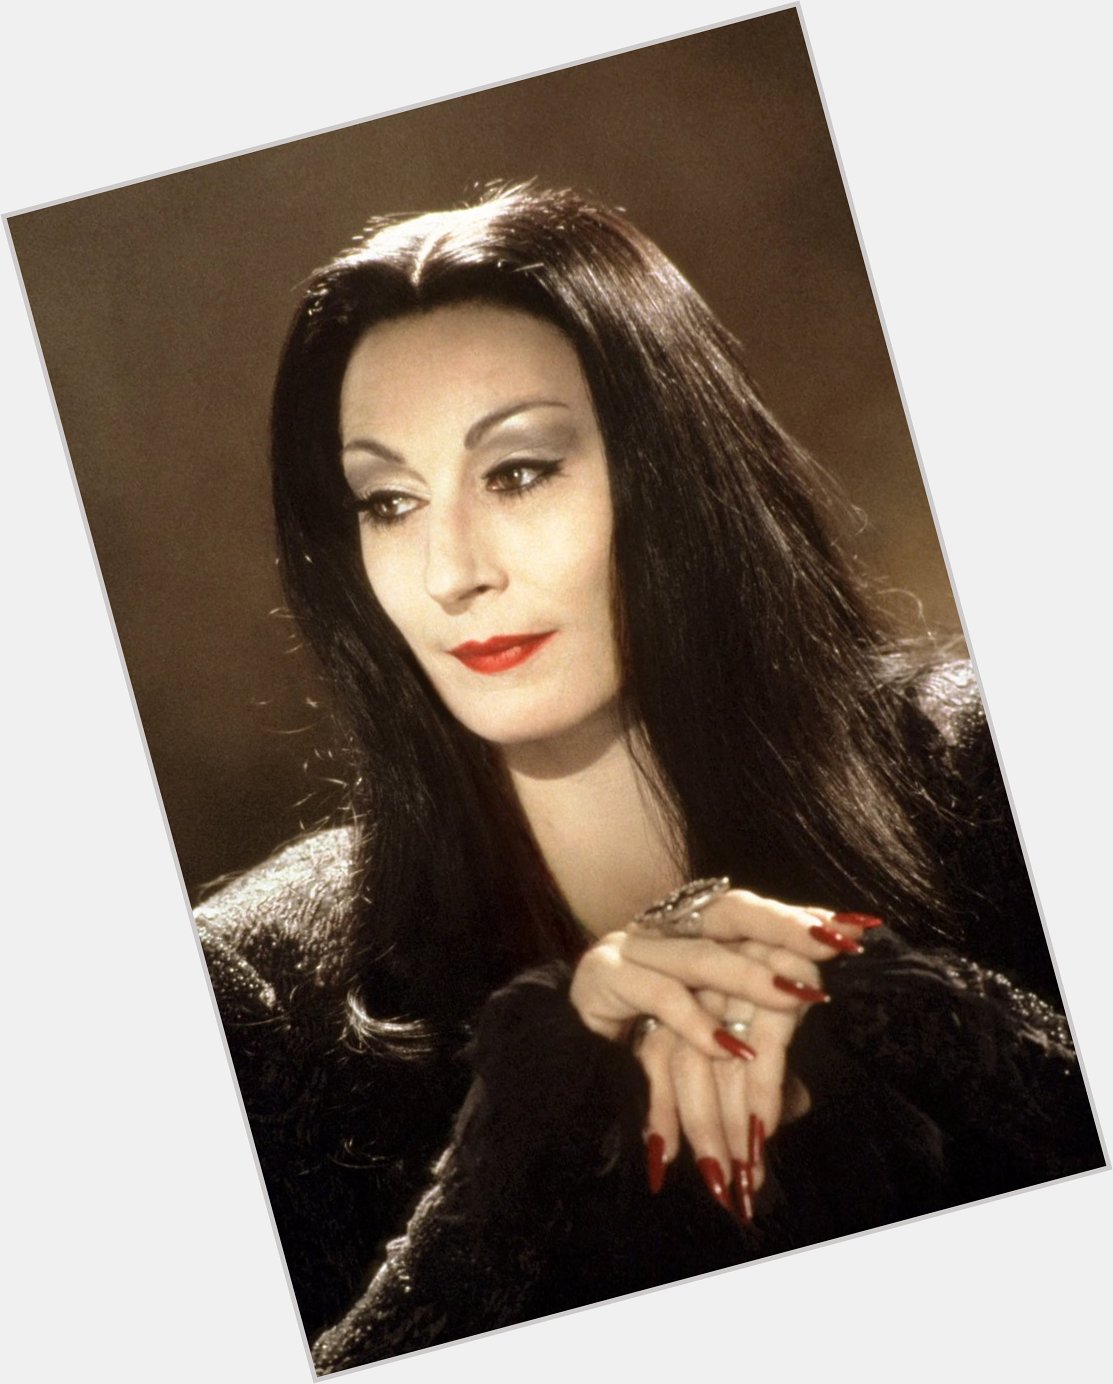 Happy birthday to Anjelica Huston, star of The Addams Family and Addams Family Values. 